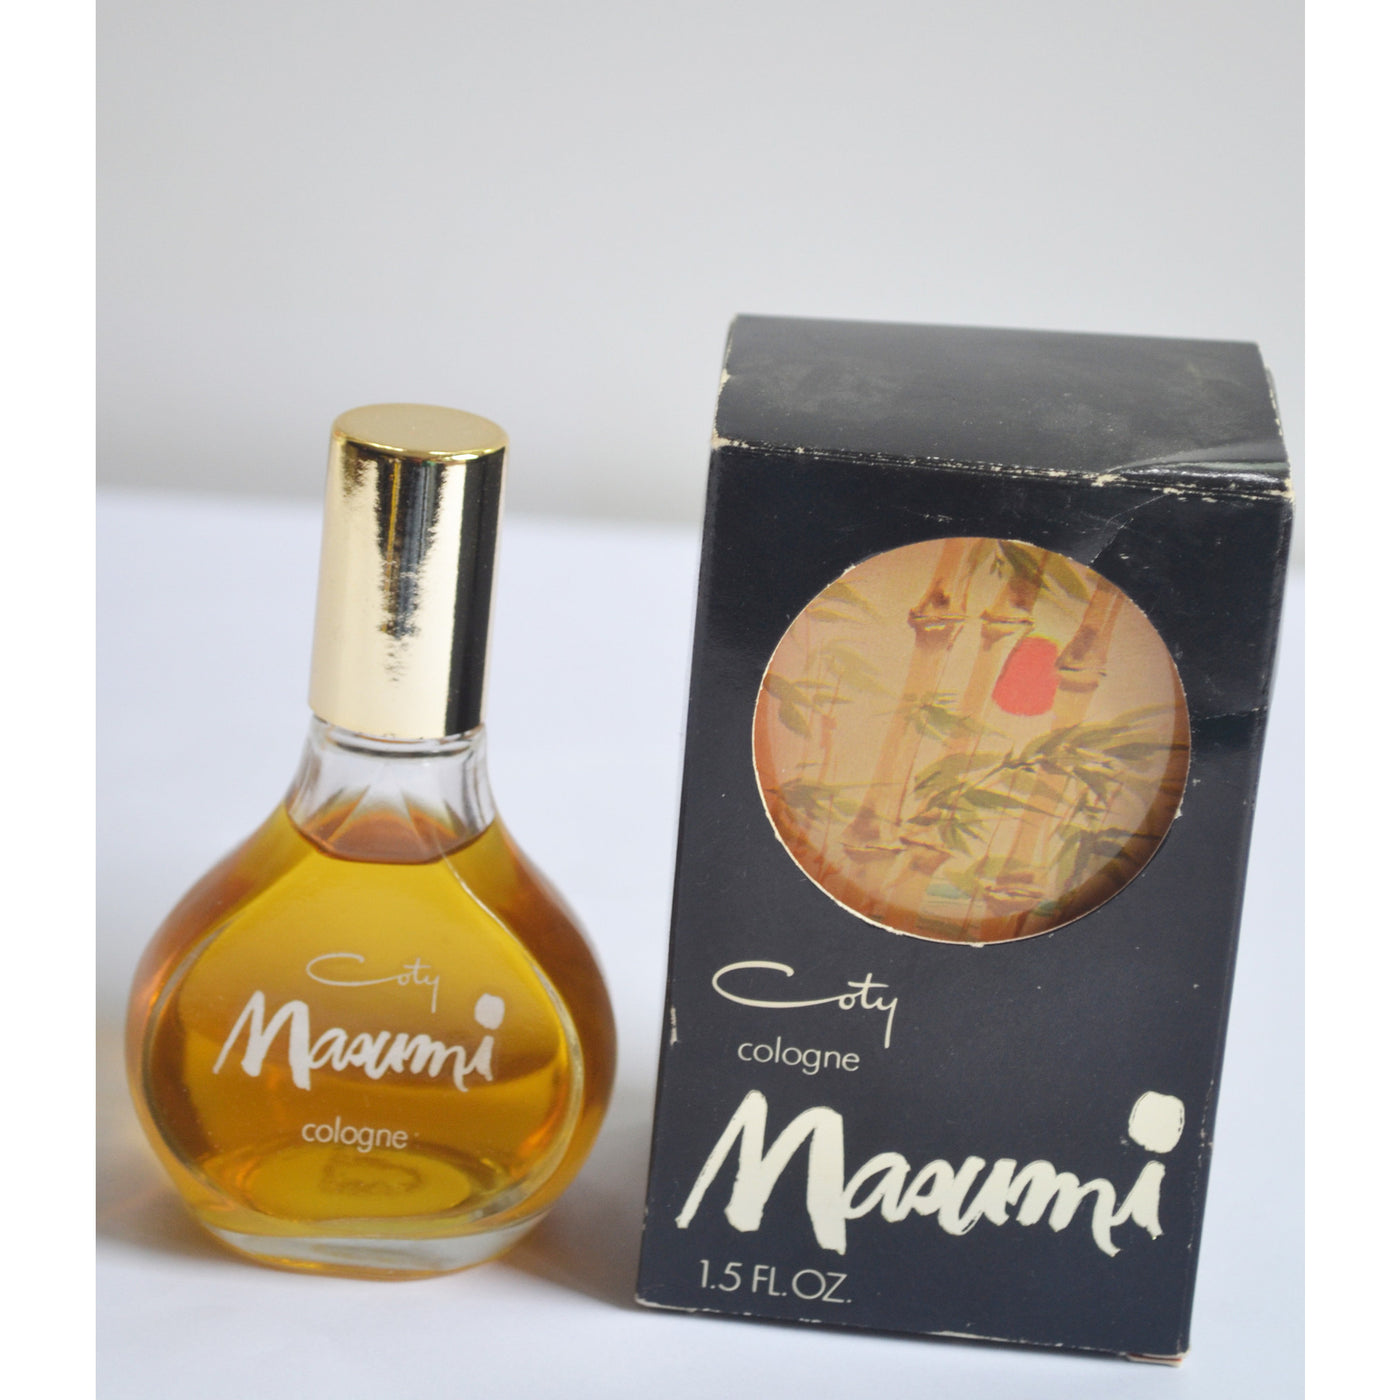 Vintage Masumi Cologne By Coty